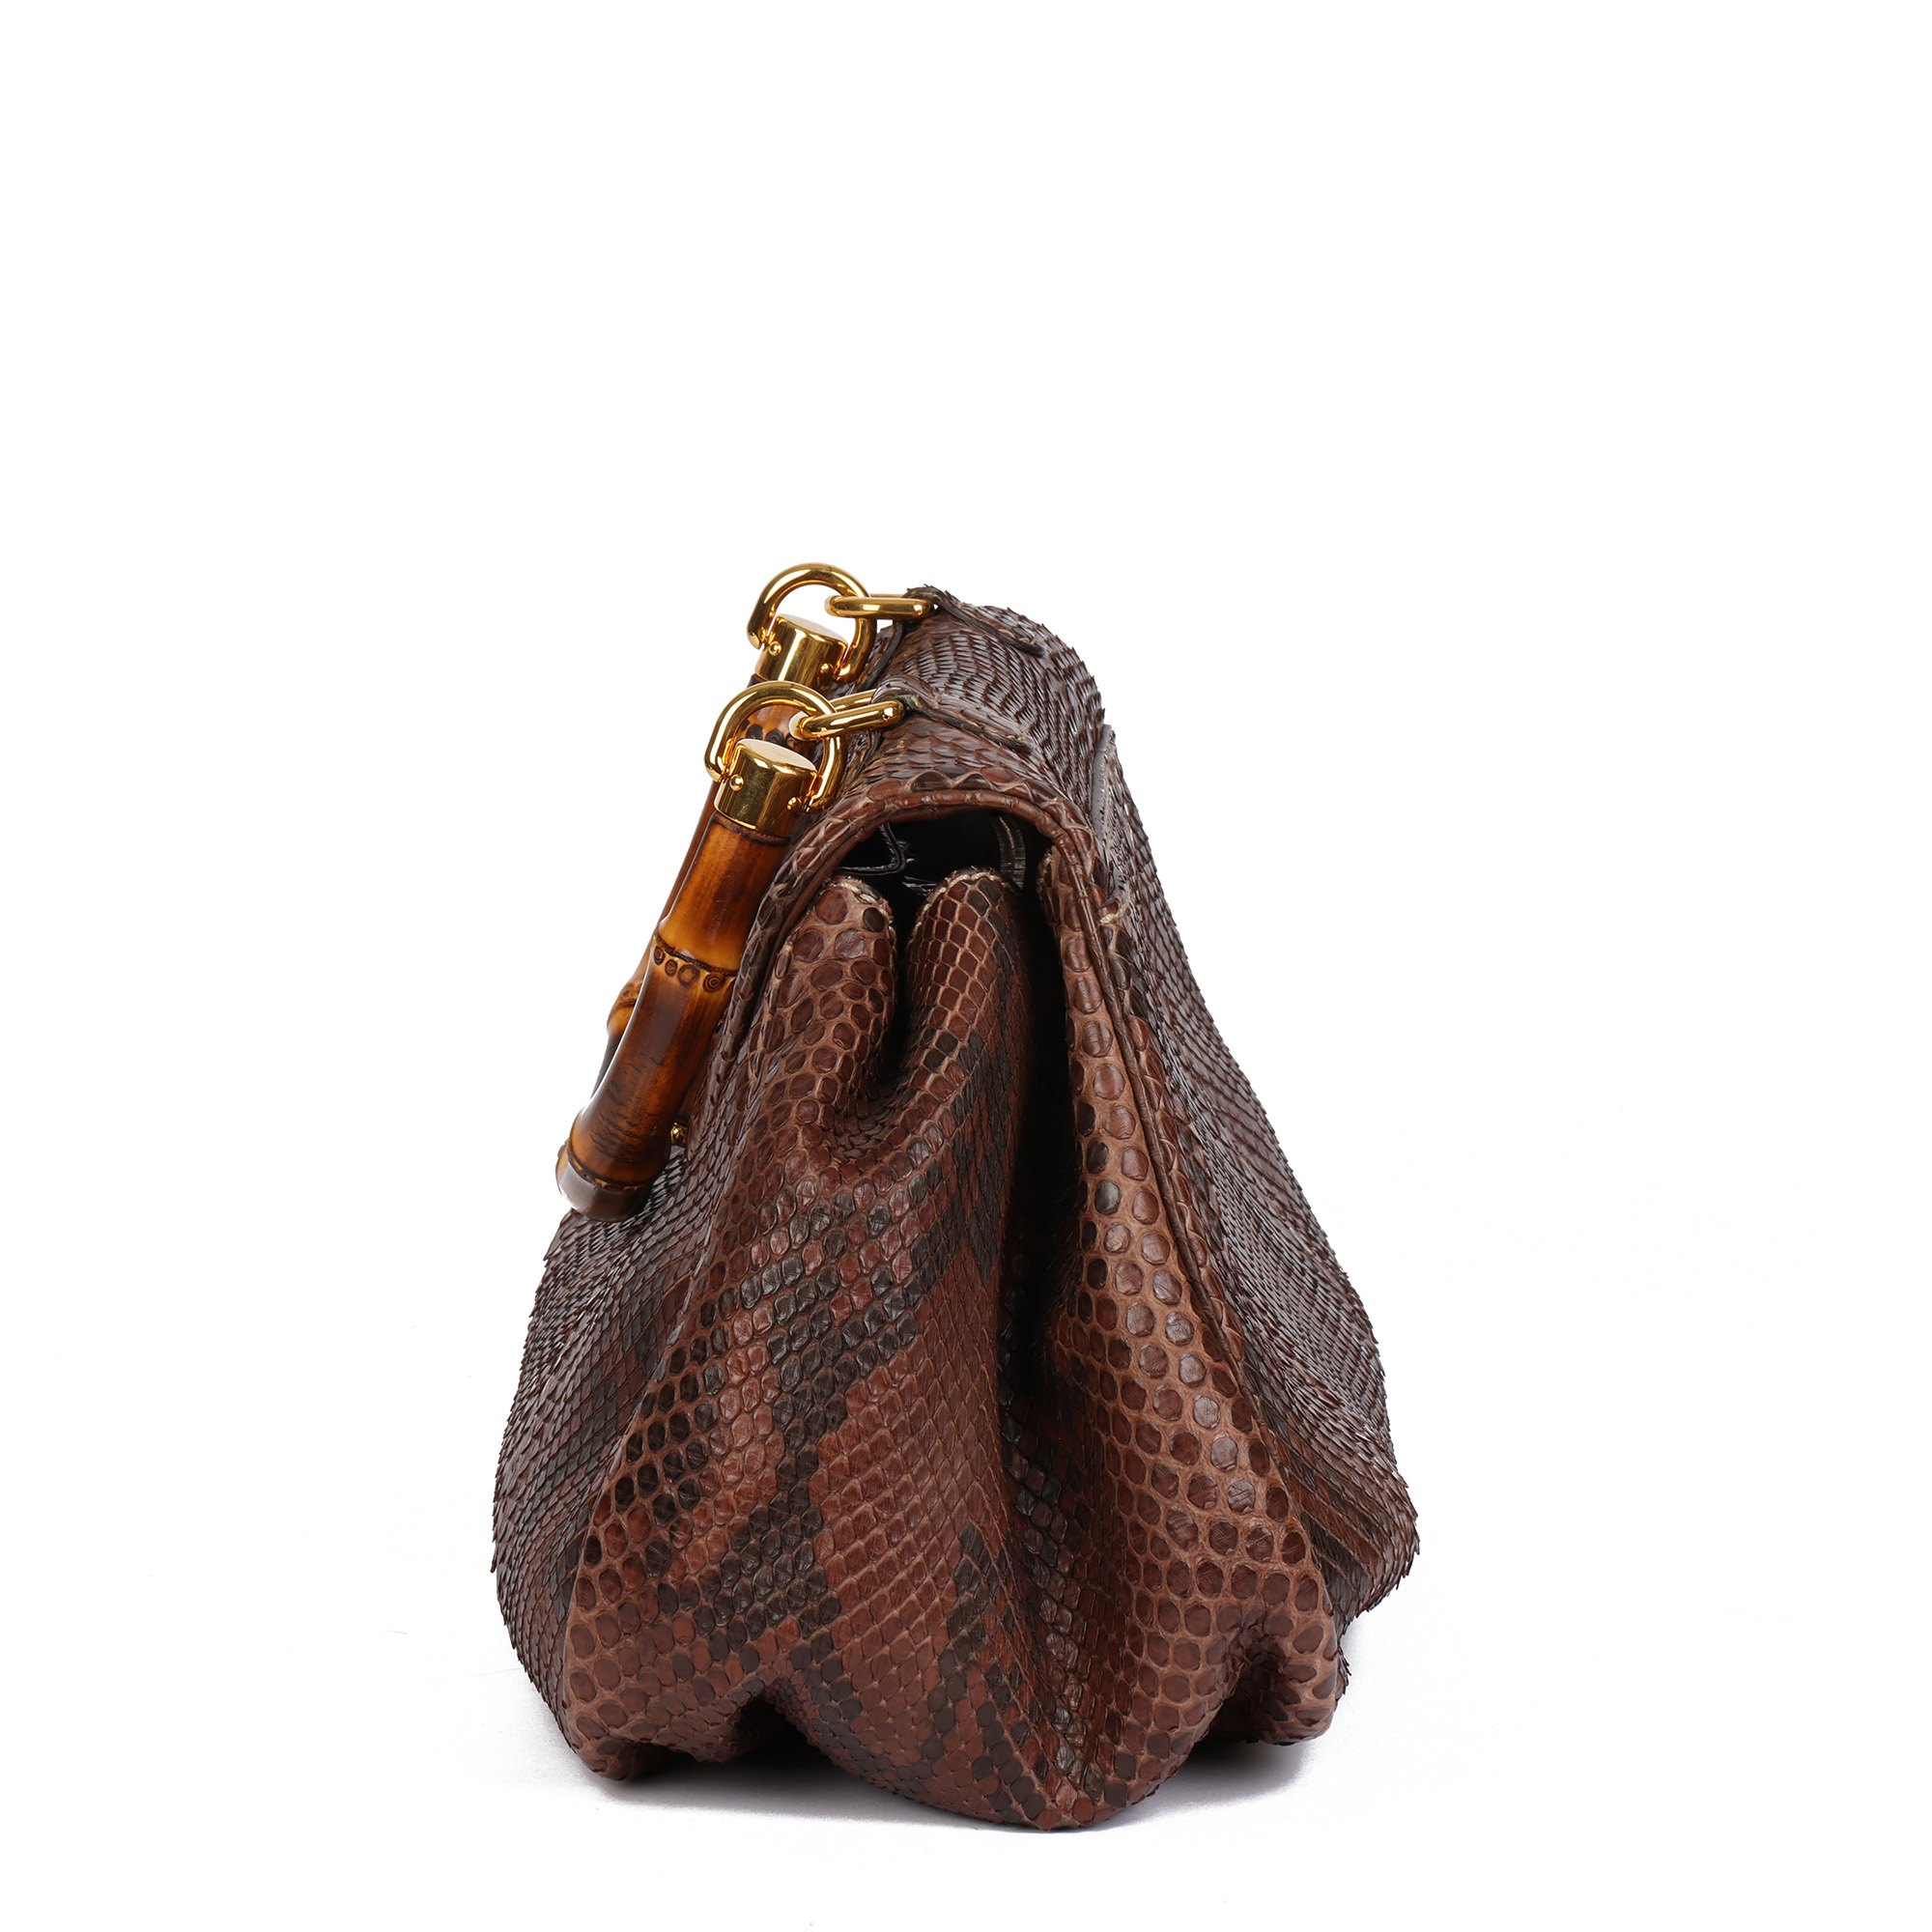 Gucci Brown Python Leather Vintage Bamboo Classic Top Handle